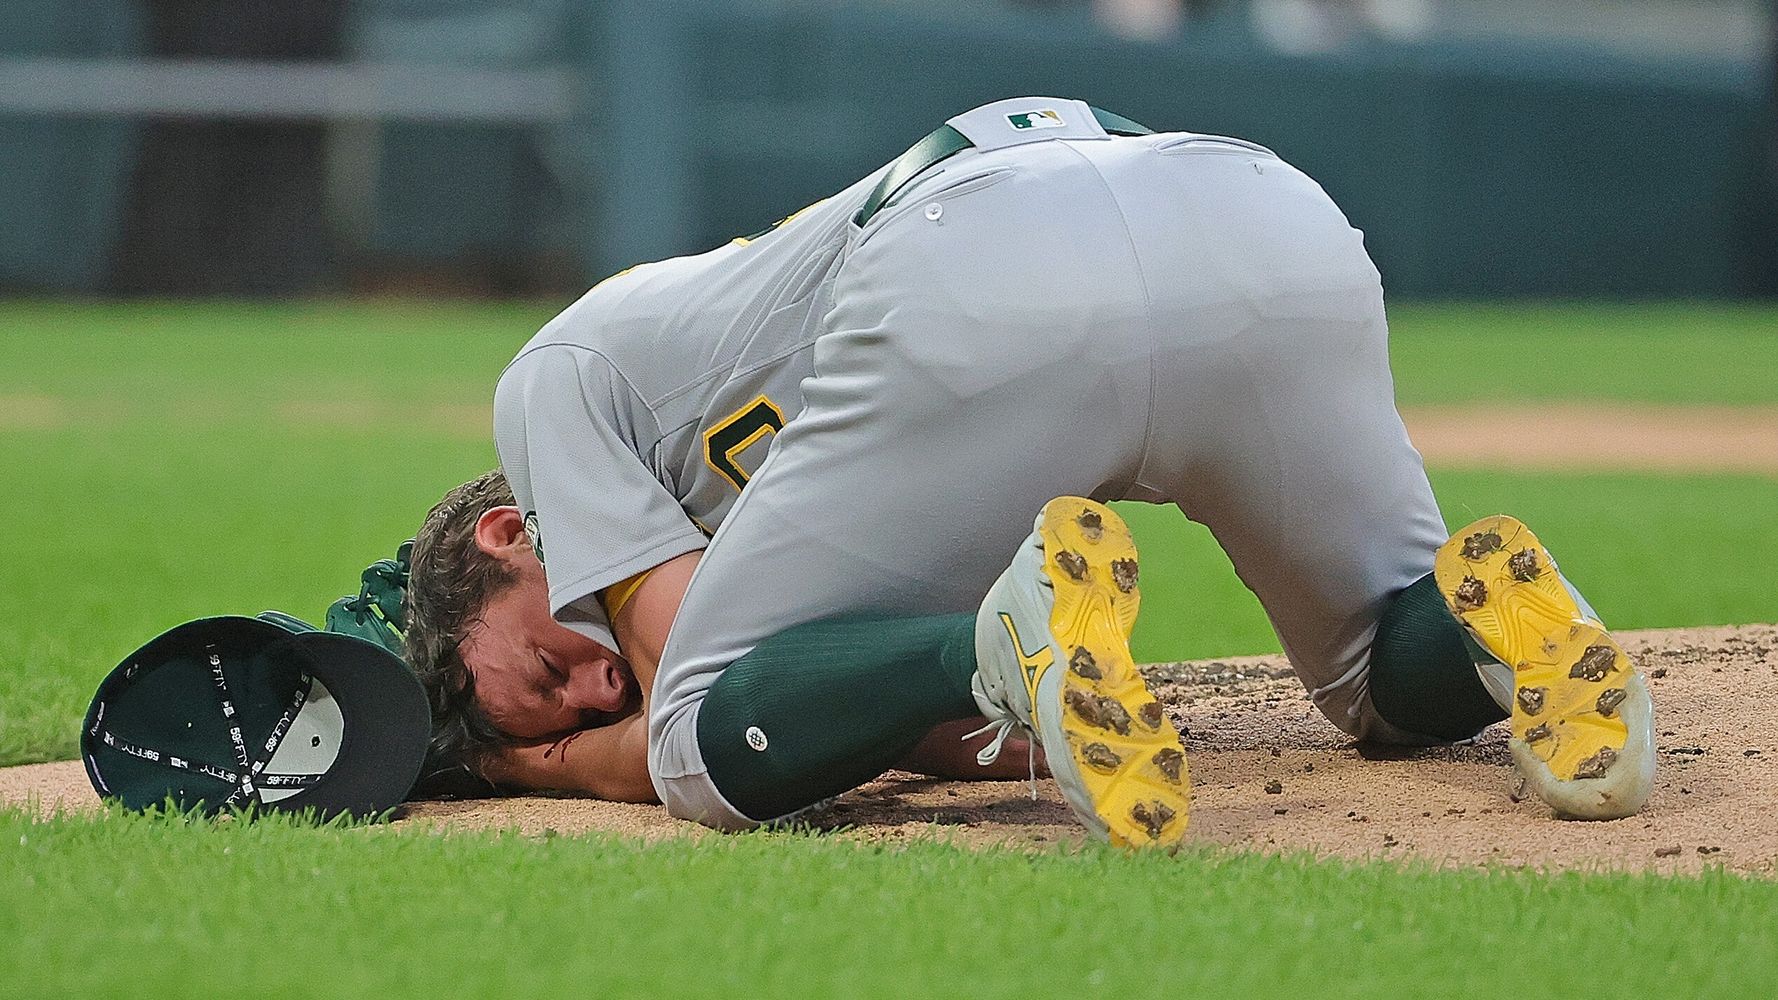 MLB Pitcher Taken To Hospital After Being Struck In The Head By A Line Drive